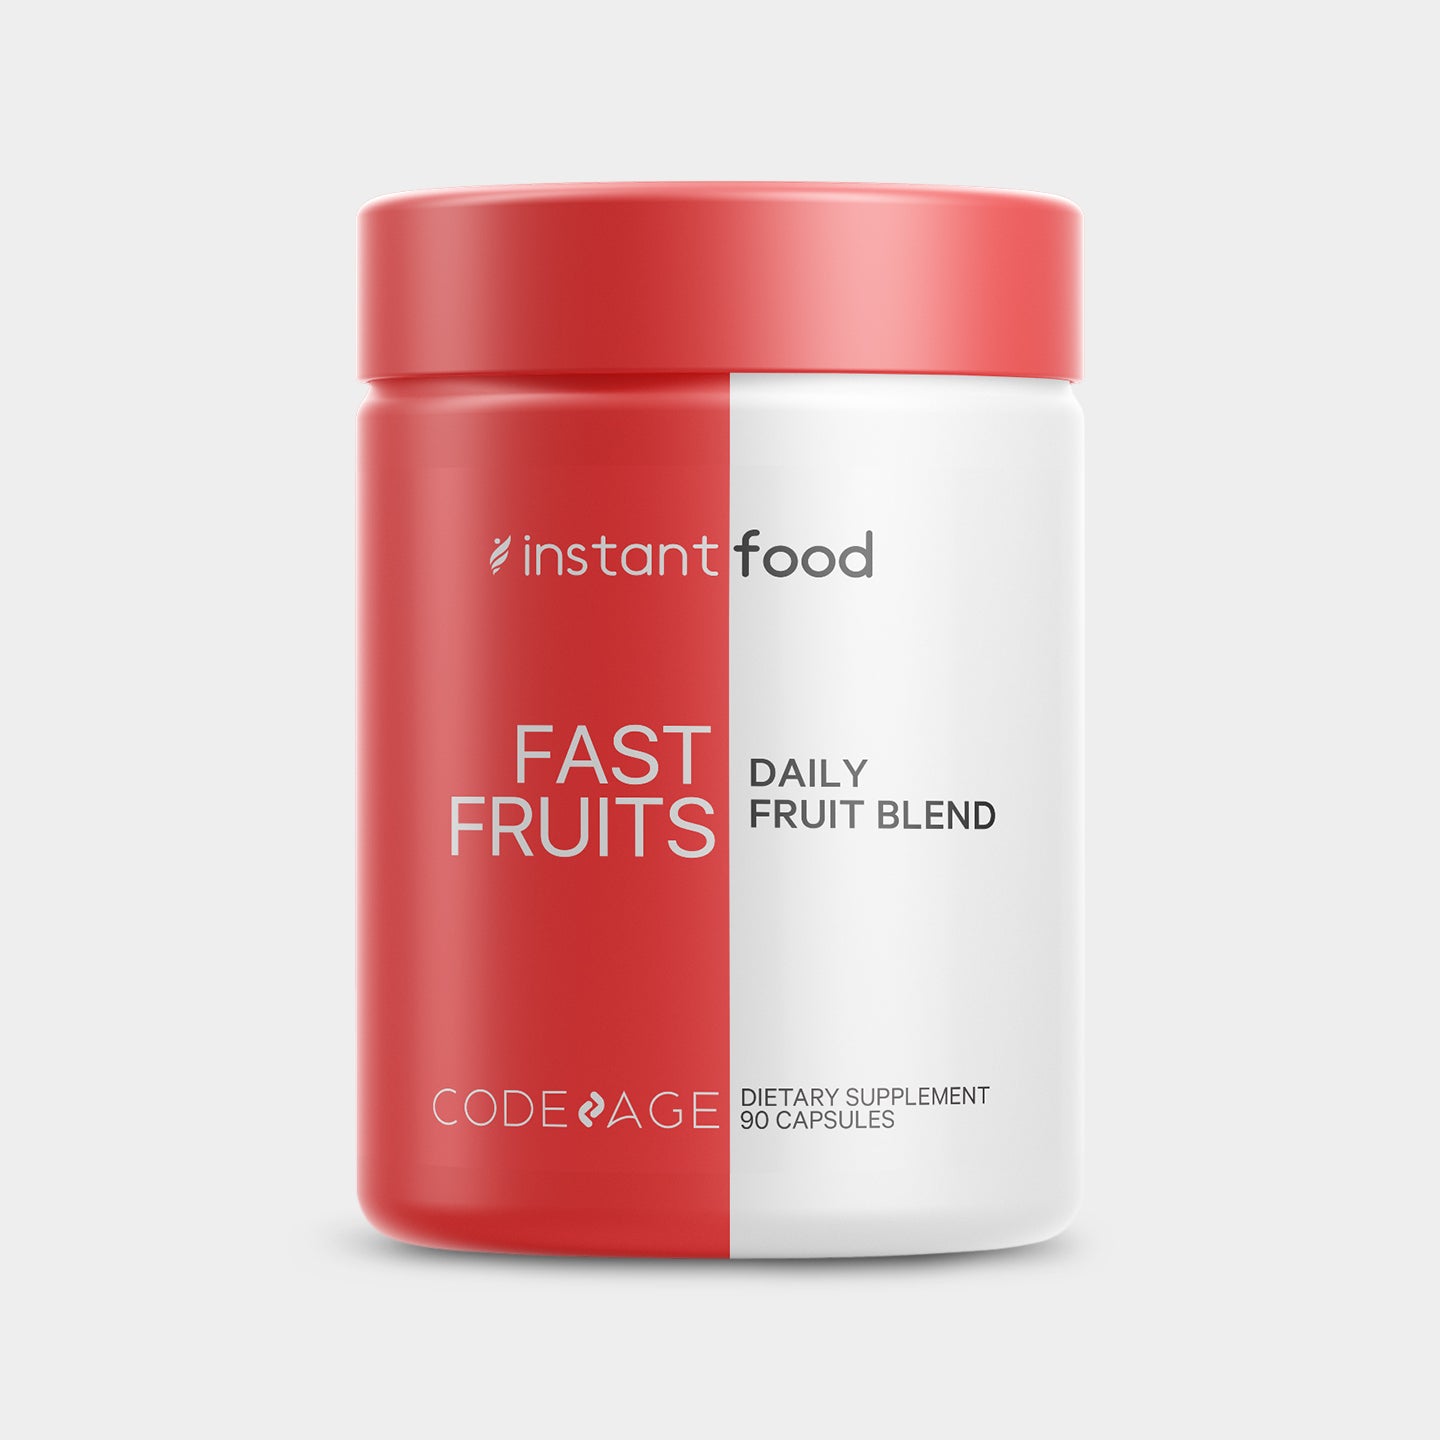 Codeage Instantfood Fast Fruits Daily Fruit Blend Supplement Main